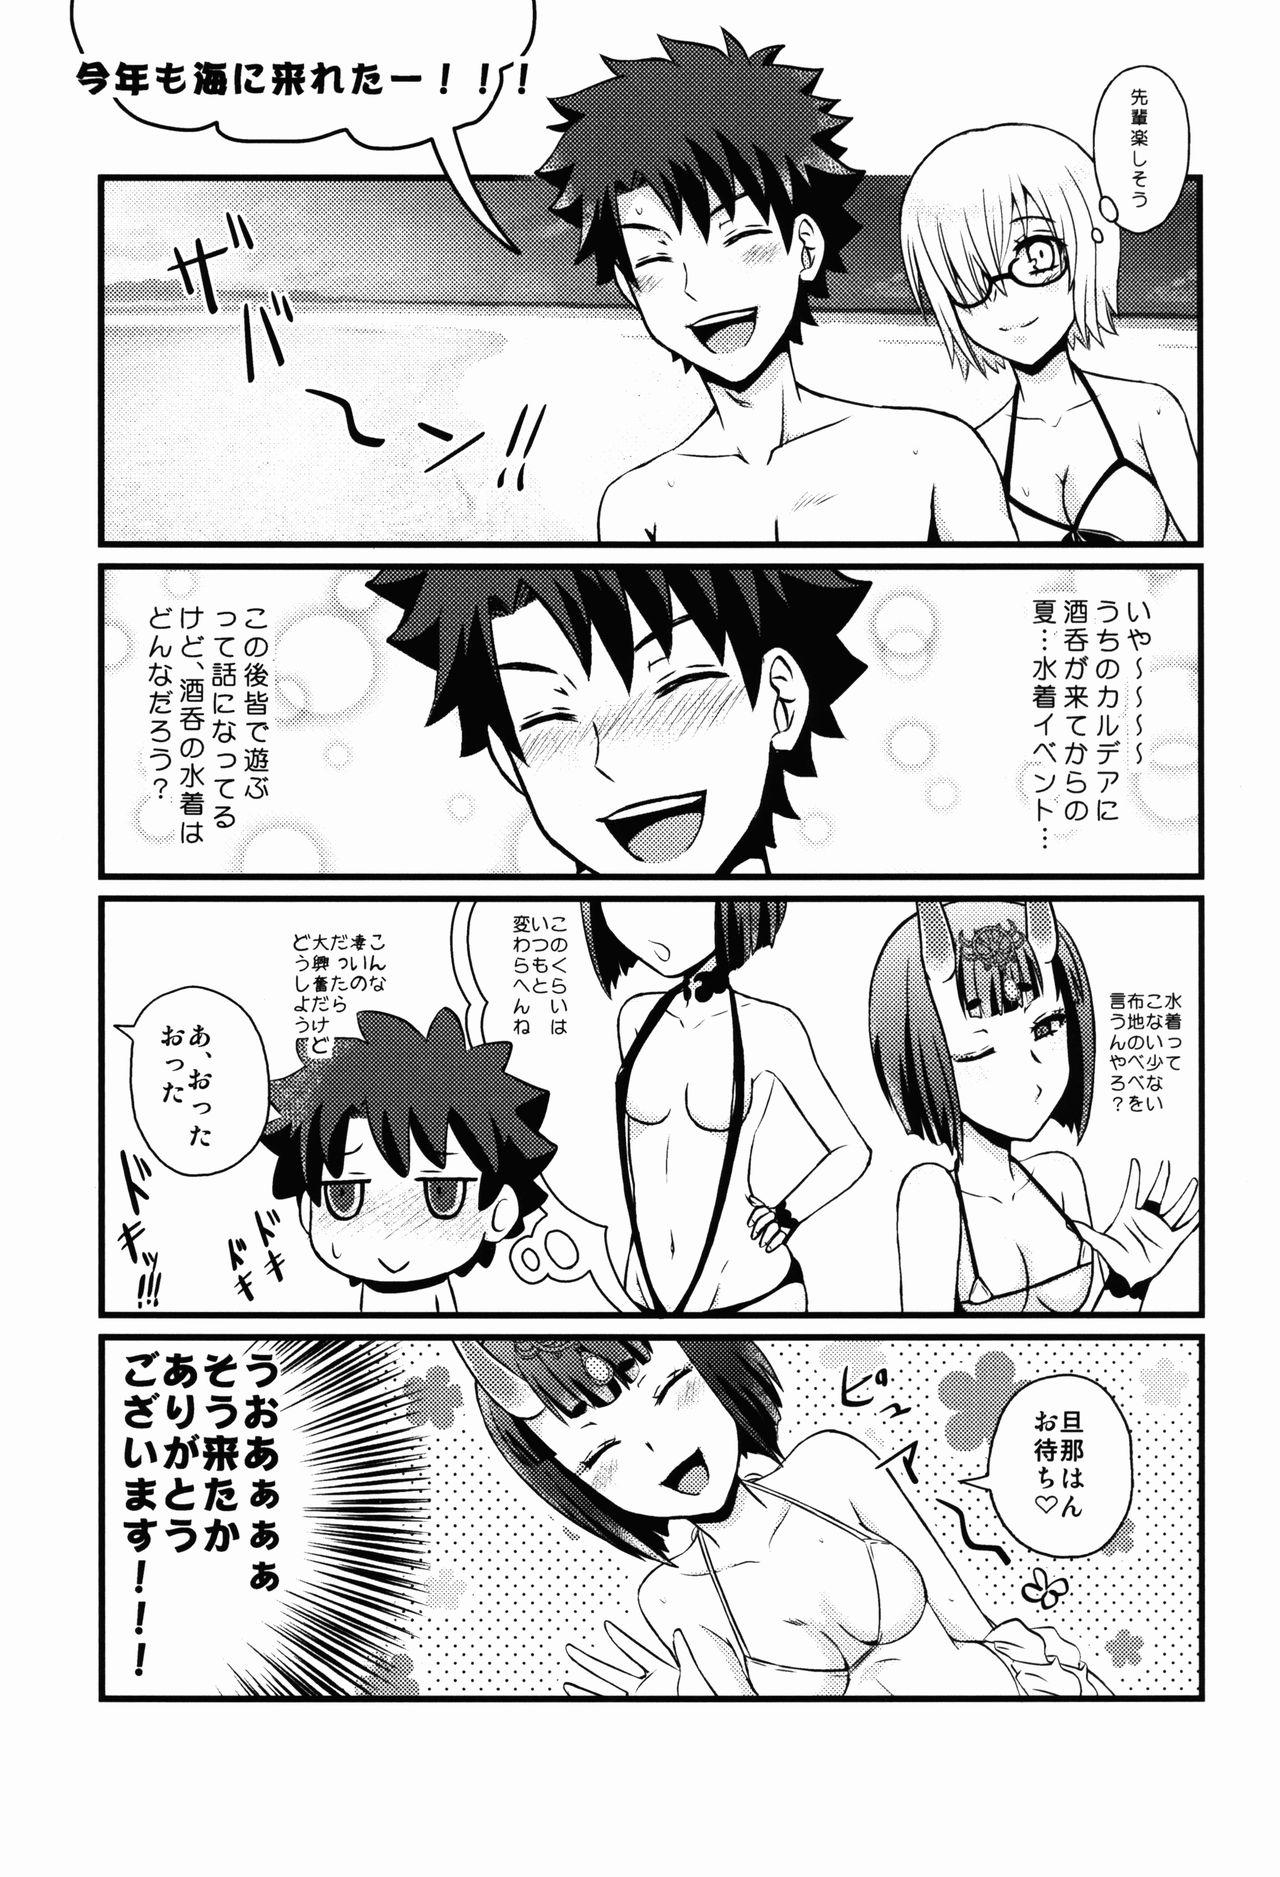 Head COMET:10 - Fate grand order Gay Averagedick - Page 5